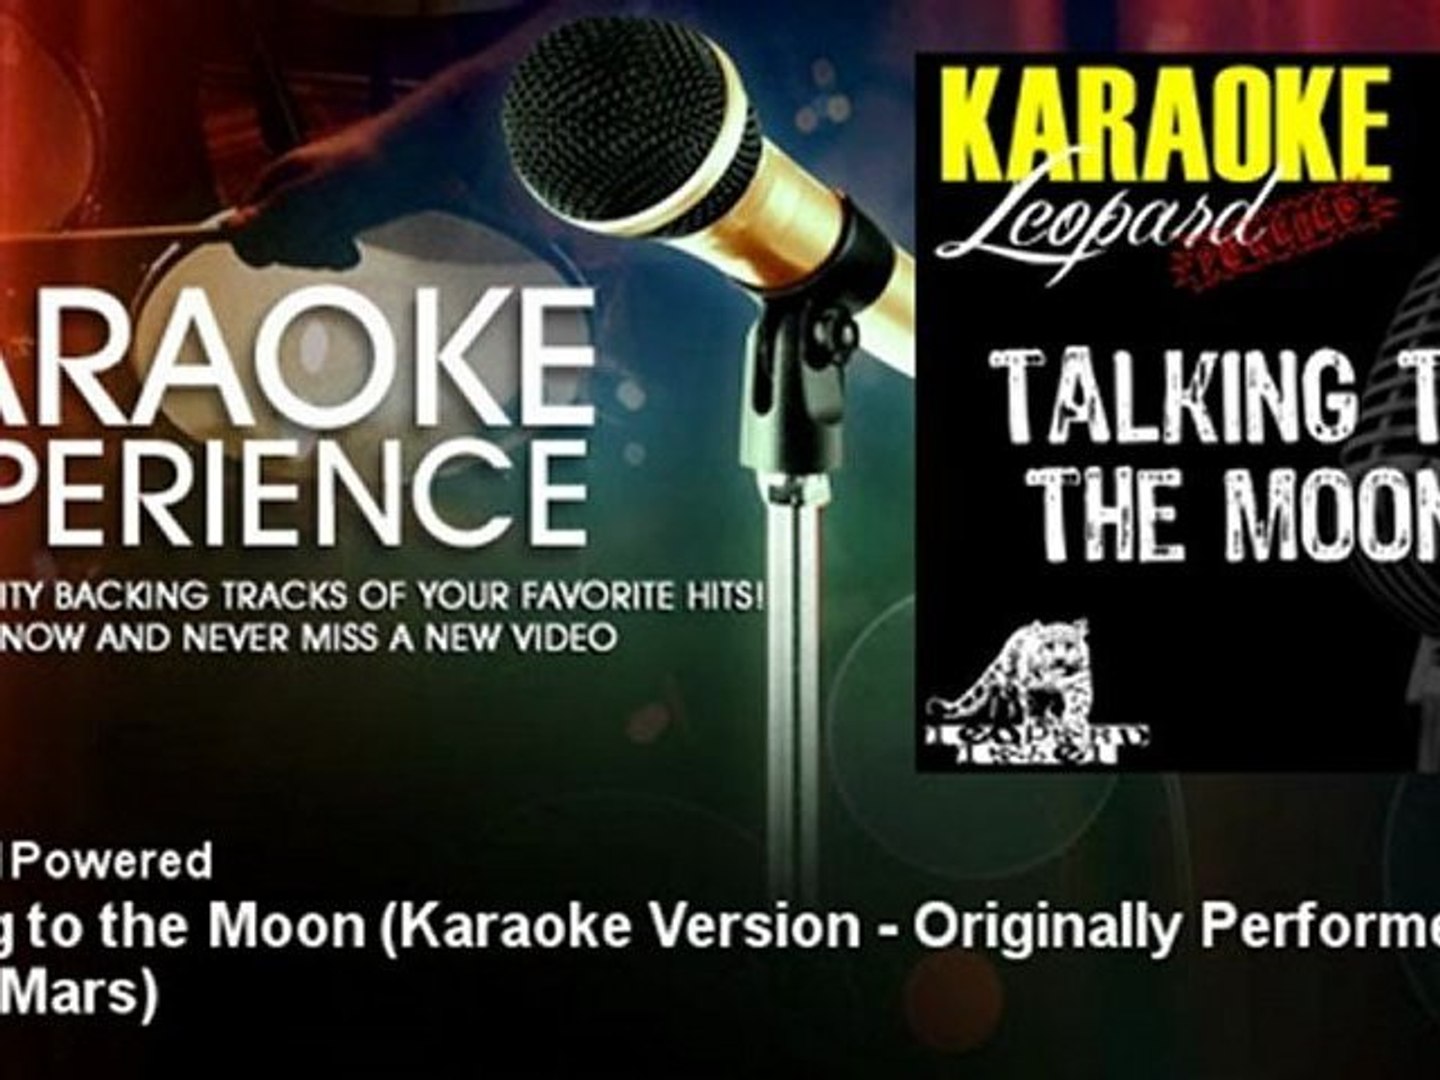 Karaoke time. Караоке мужское. Караоке мен. Караоке мужчина. Call me maybe караоке.